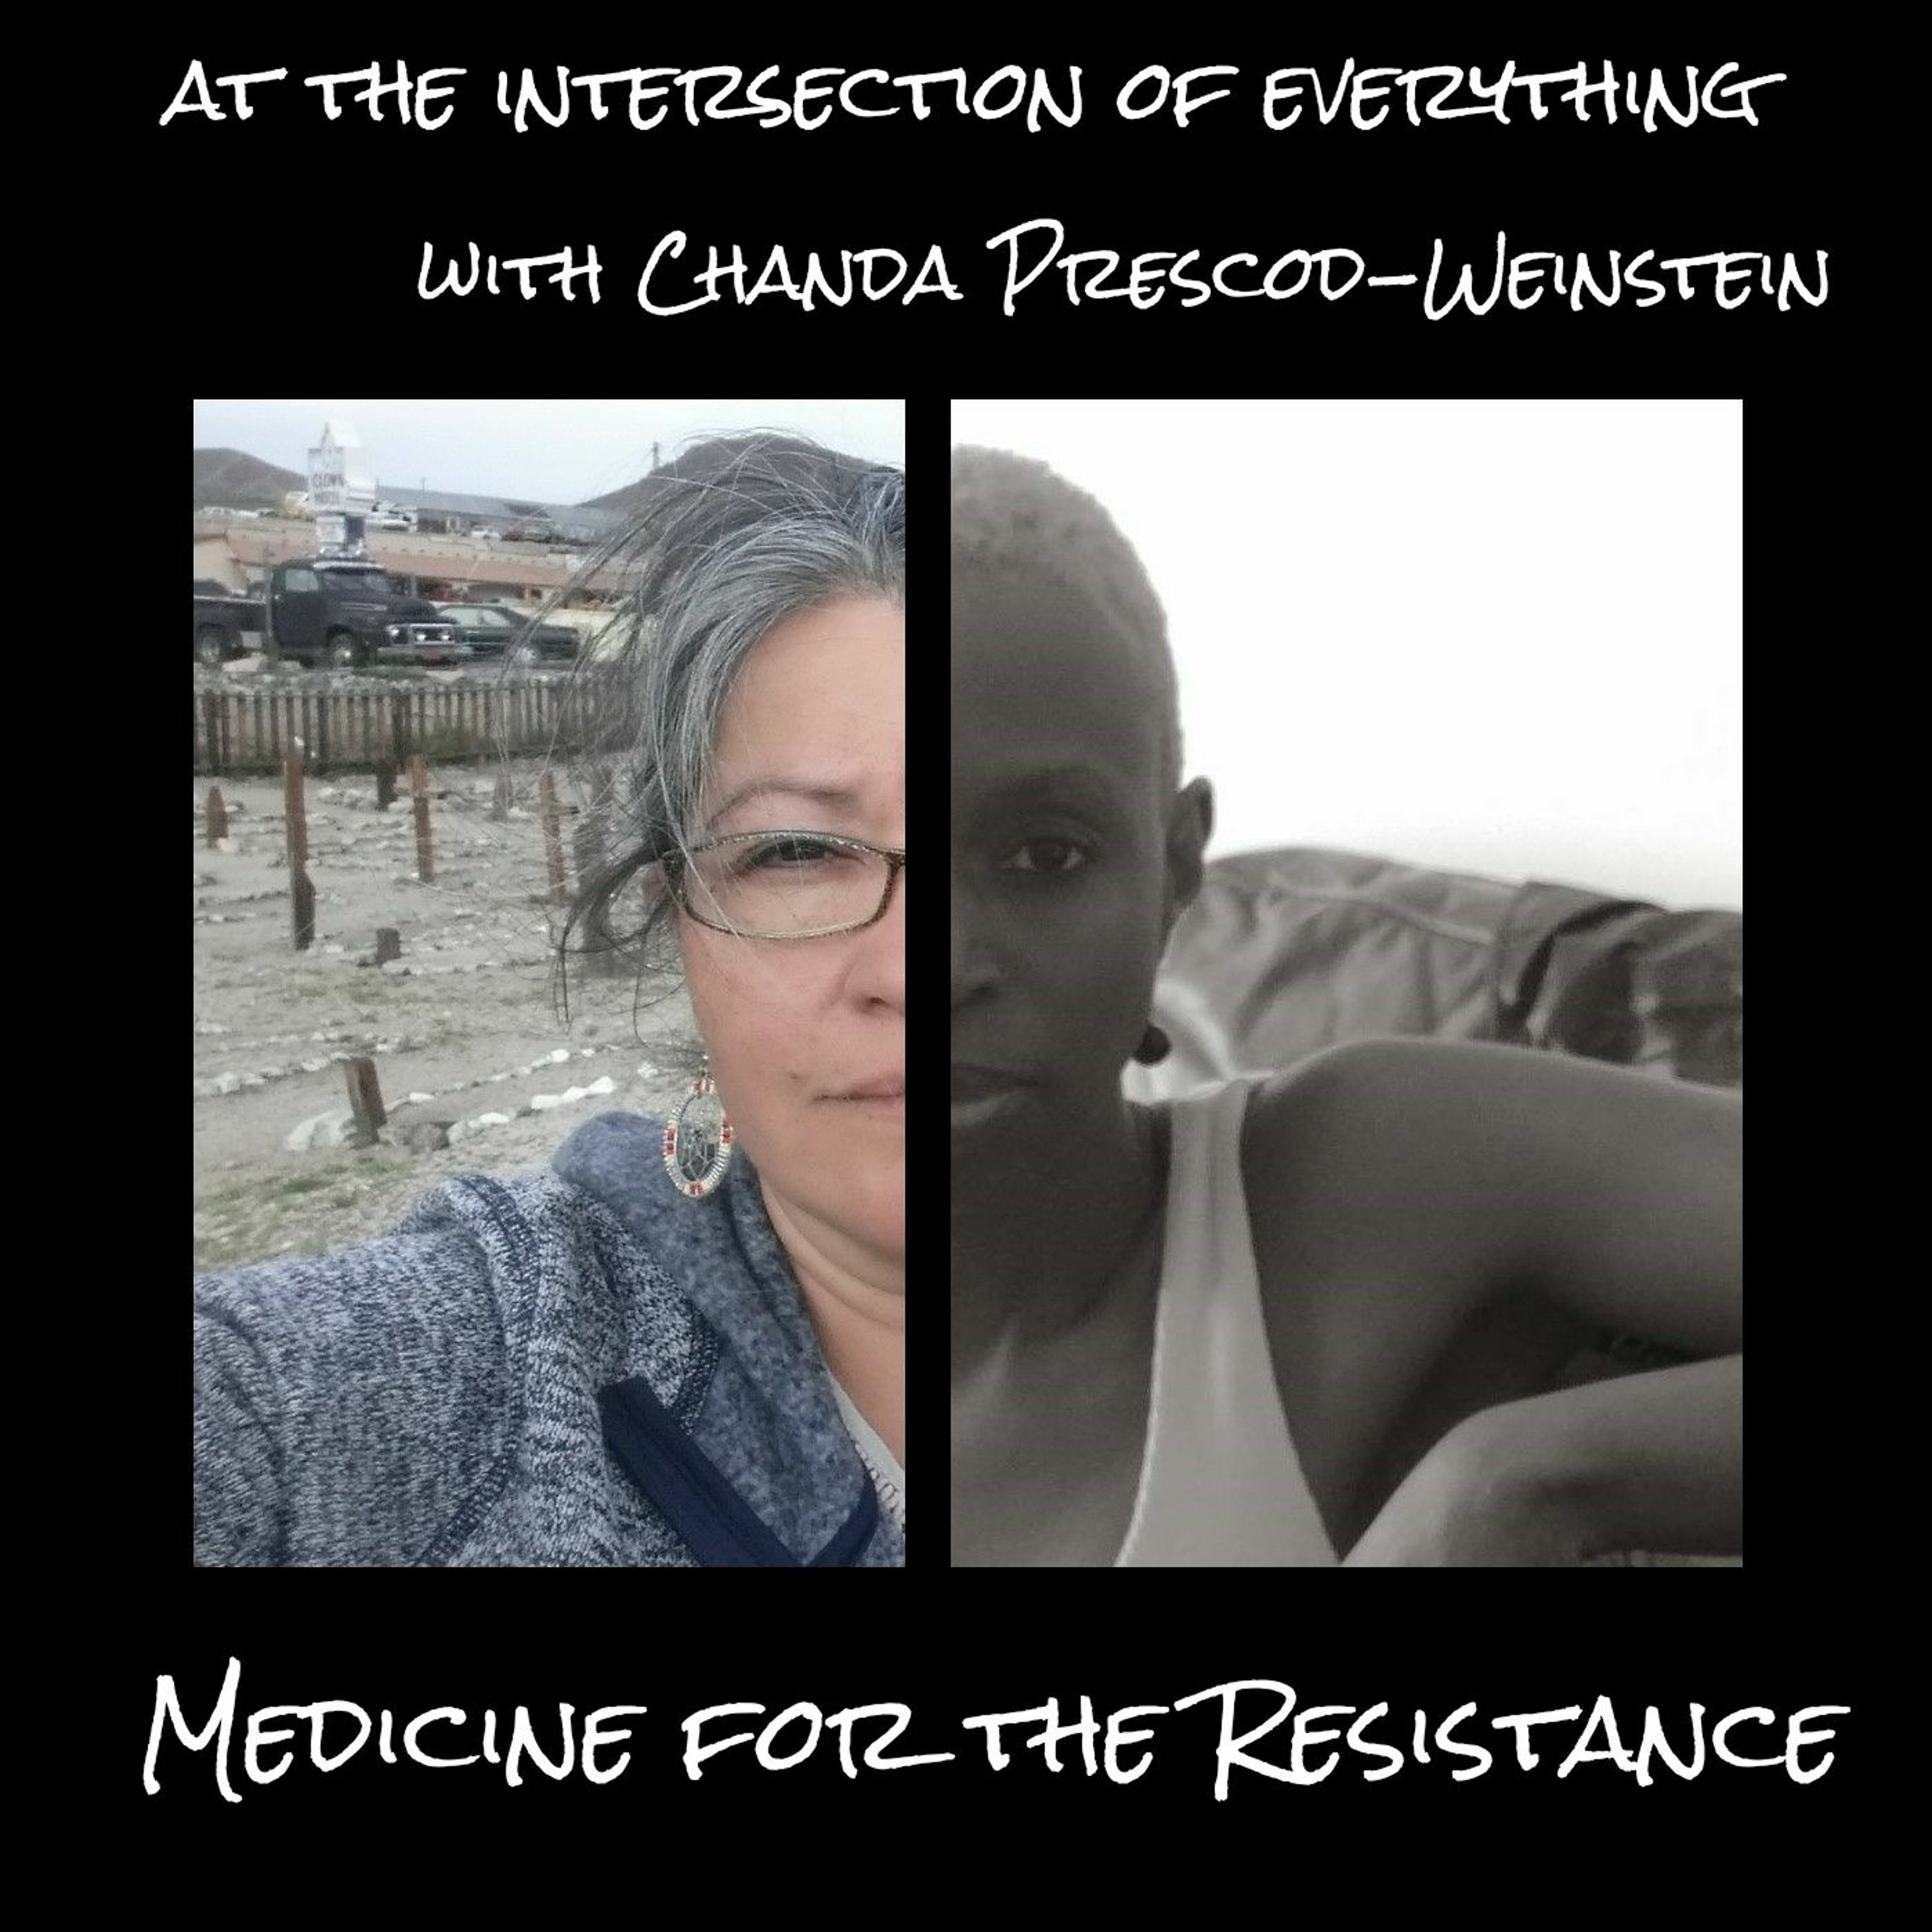 At the intersection of everything with Chanda Prescod-Weinstein